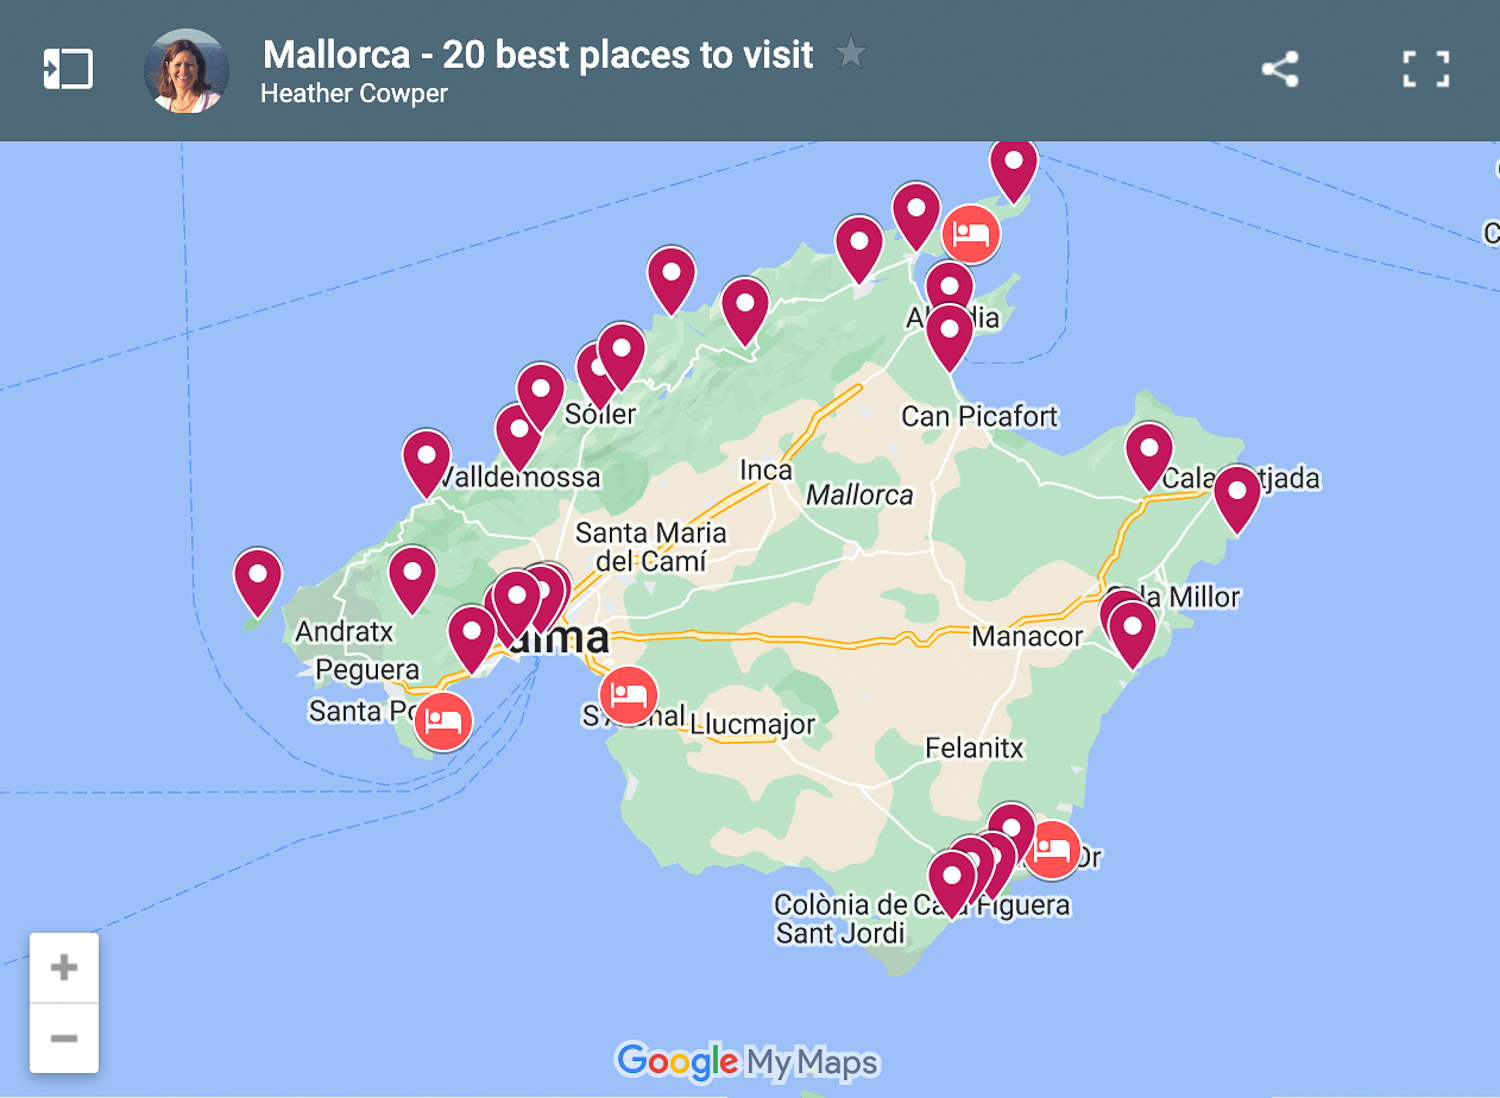 Map of Best places to visit in Mallorca by Heatheronhertravels.com